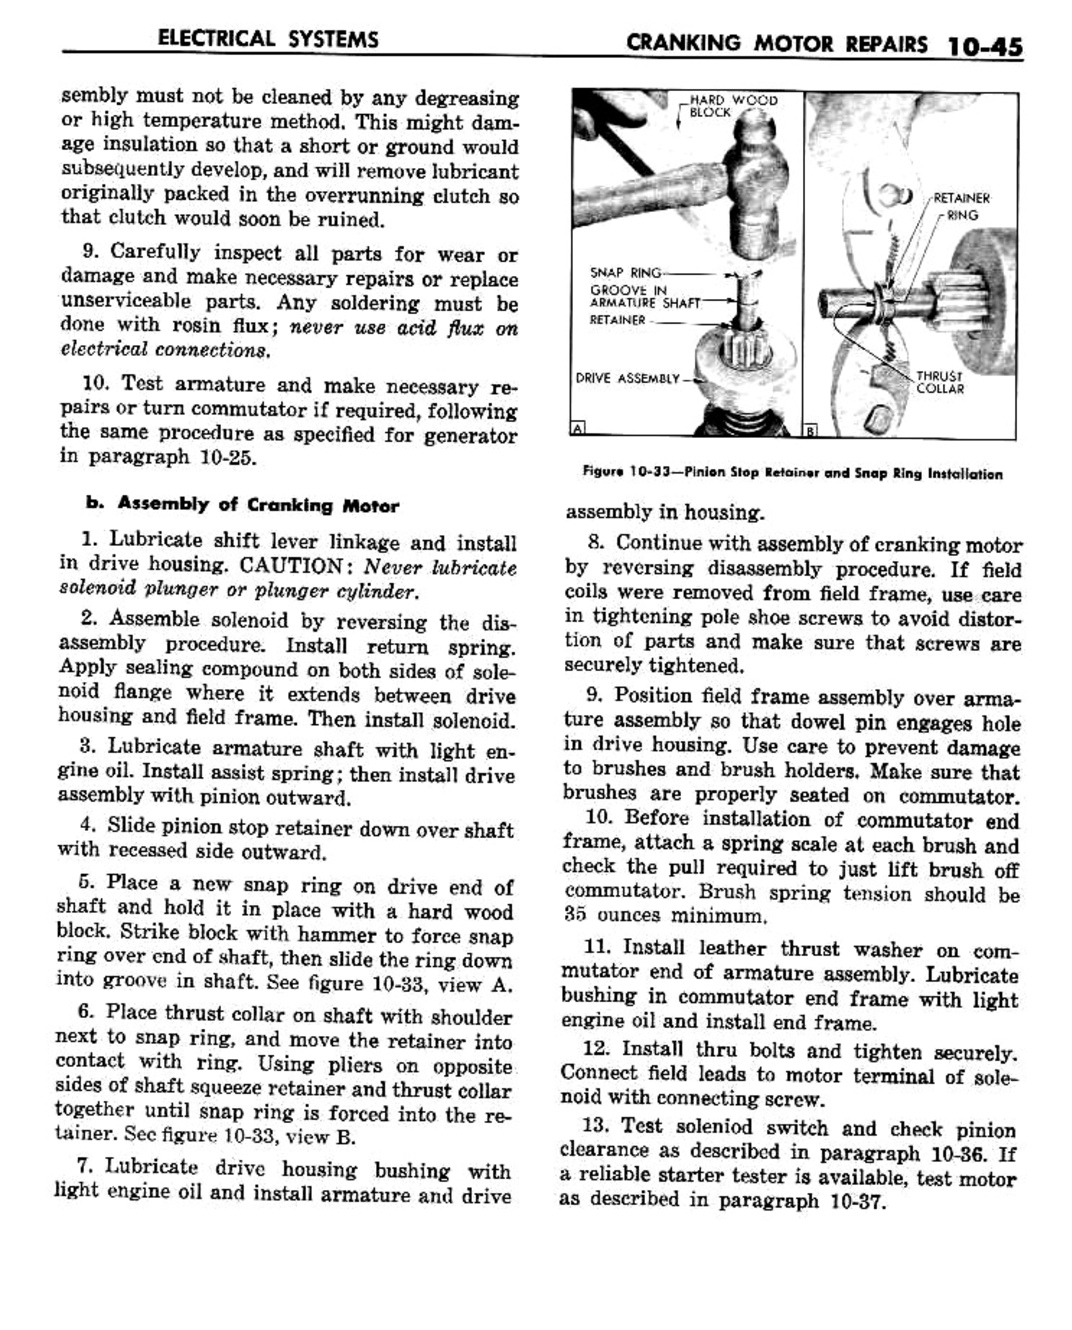 n_11 1960 Buick Shop Manual - Electrical Systems-045-045.jpg